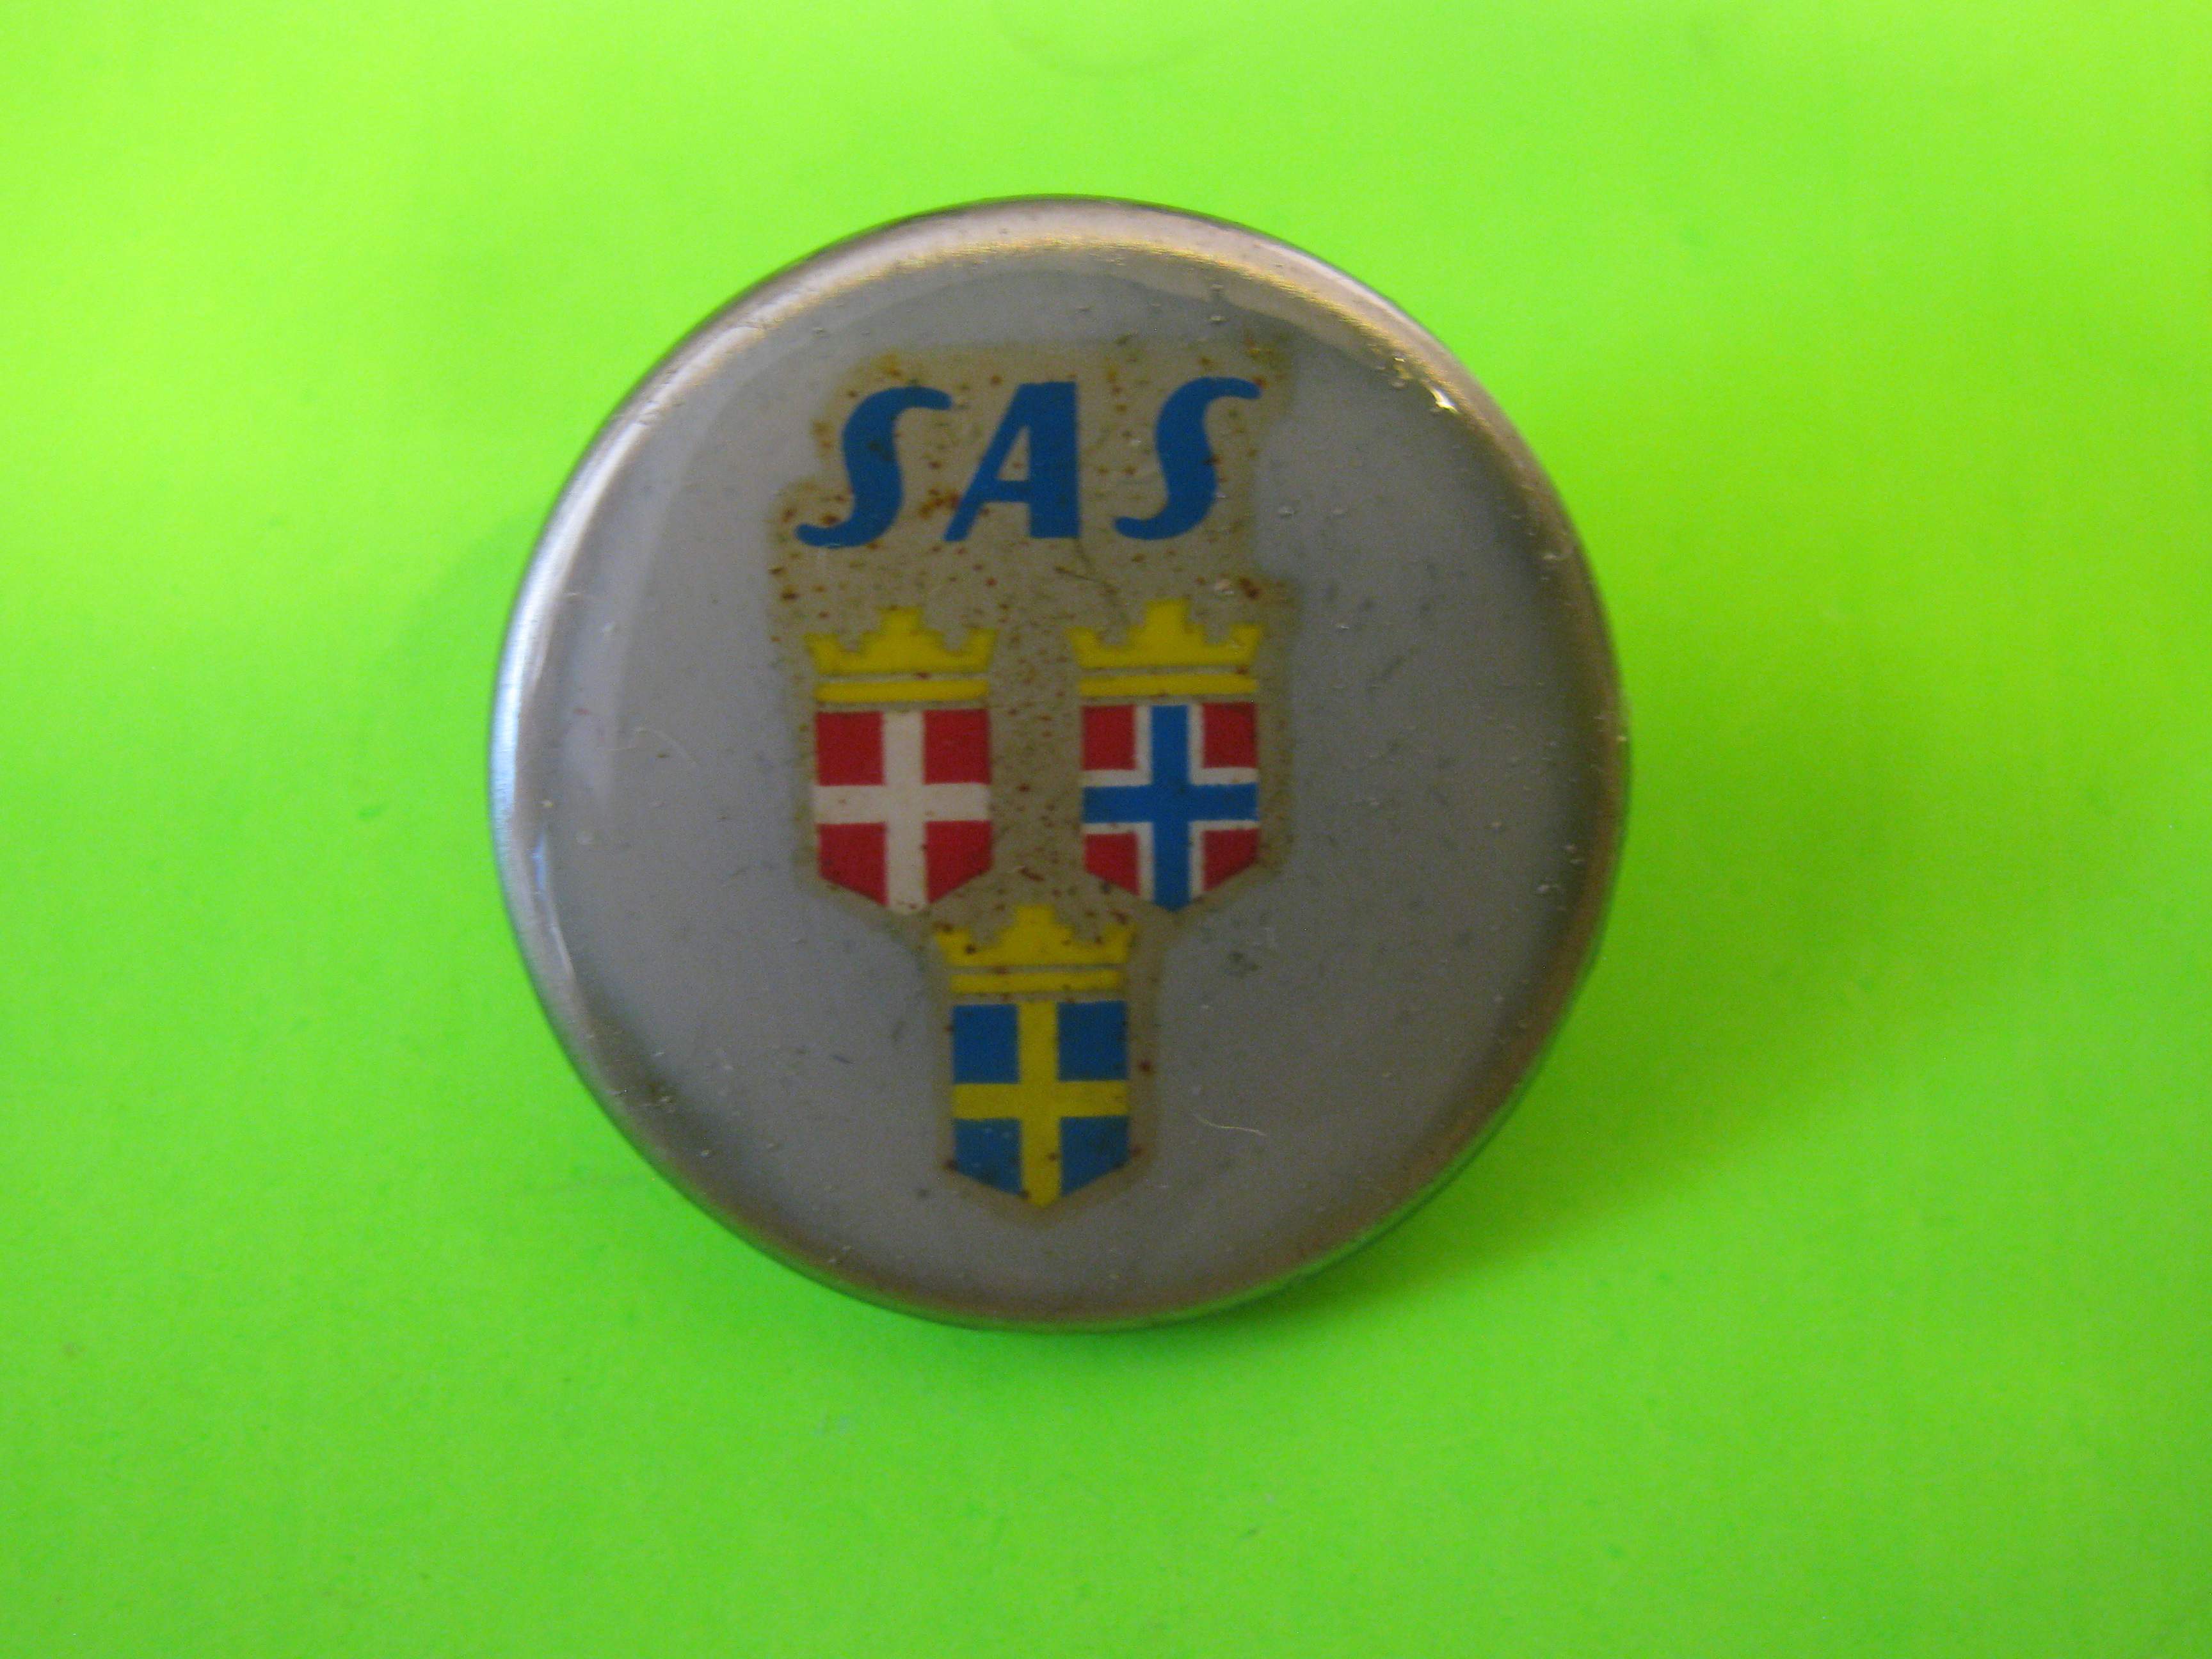 SAS Flags on Metal Button with Metal Loop Shank